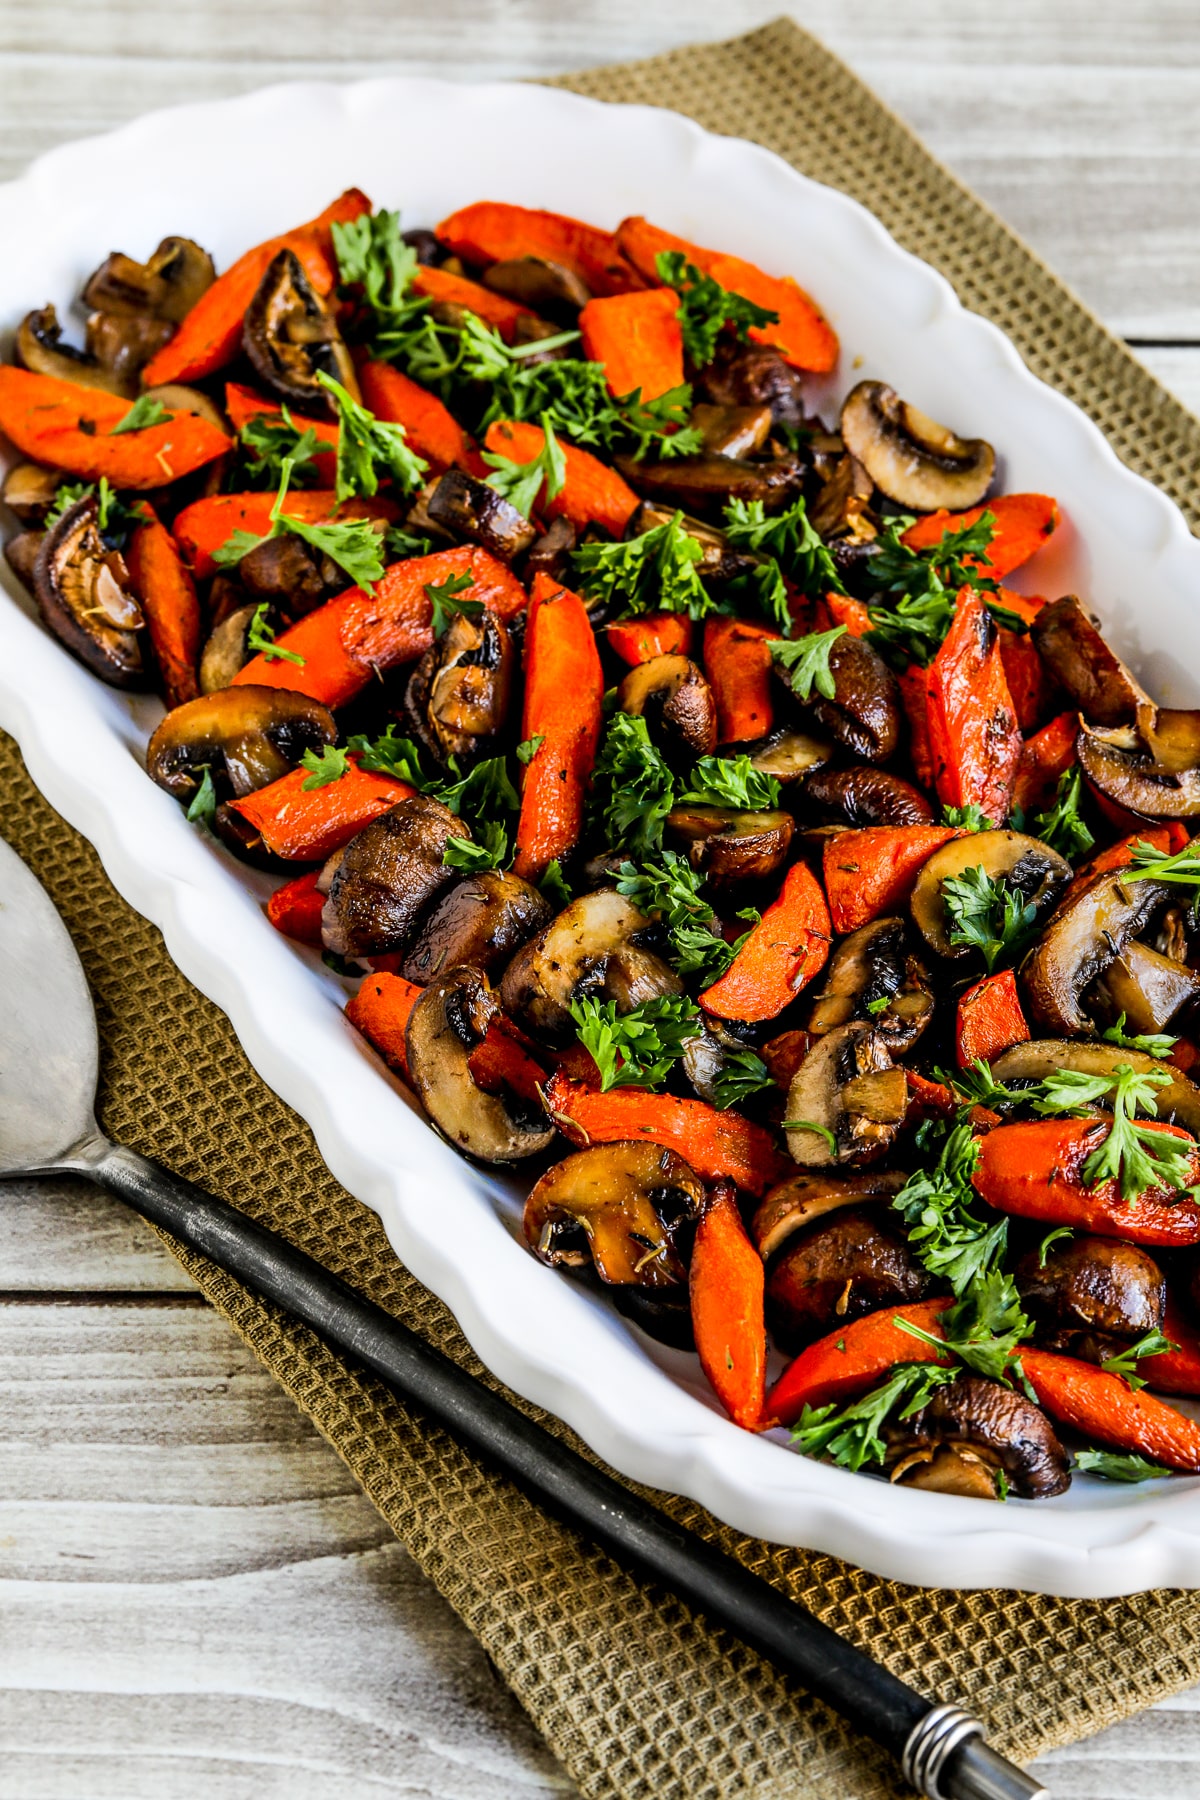 Roasted Carrots and Mushrooms shown on serving plate with parsley garnish